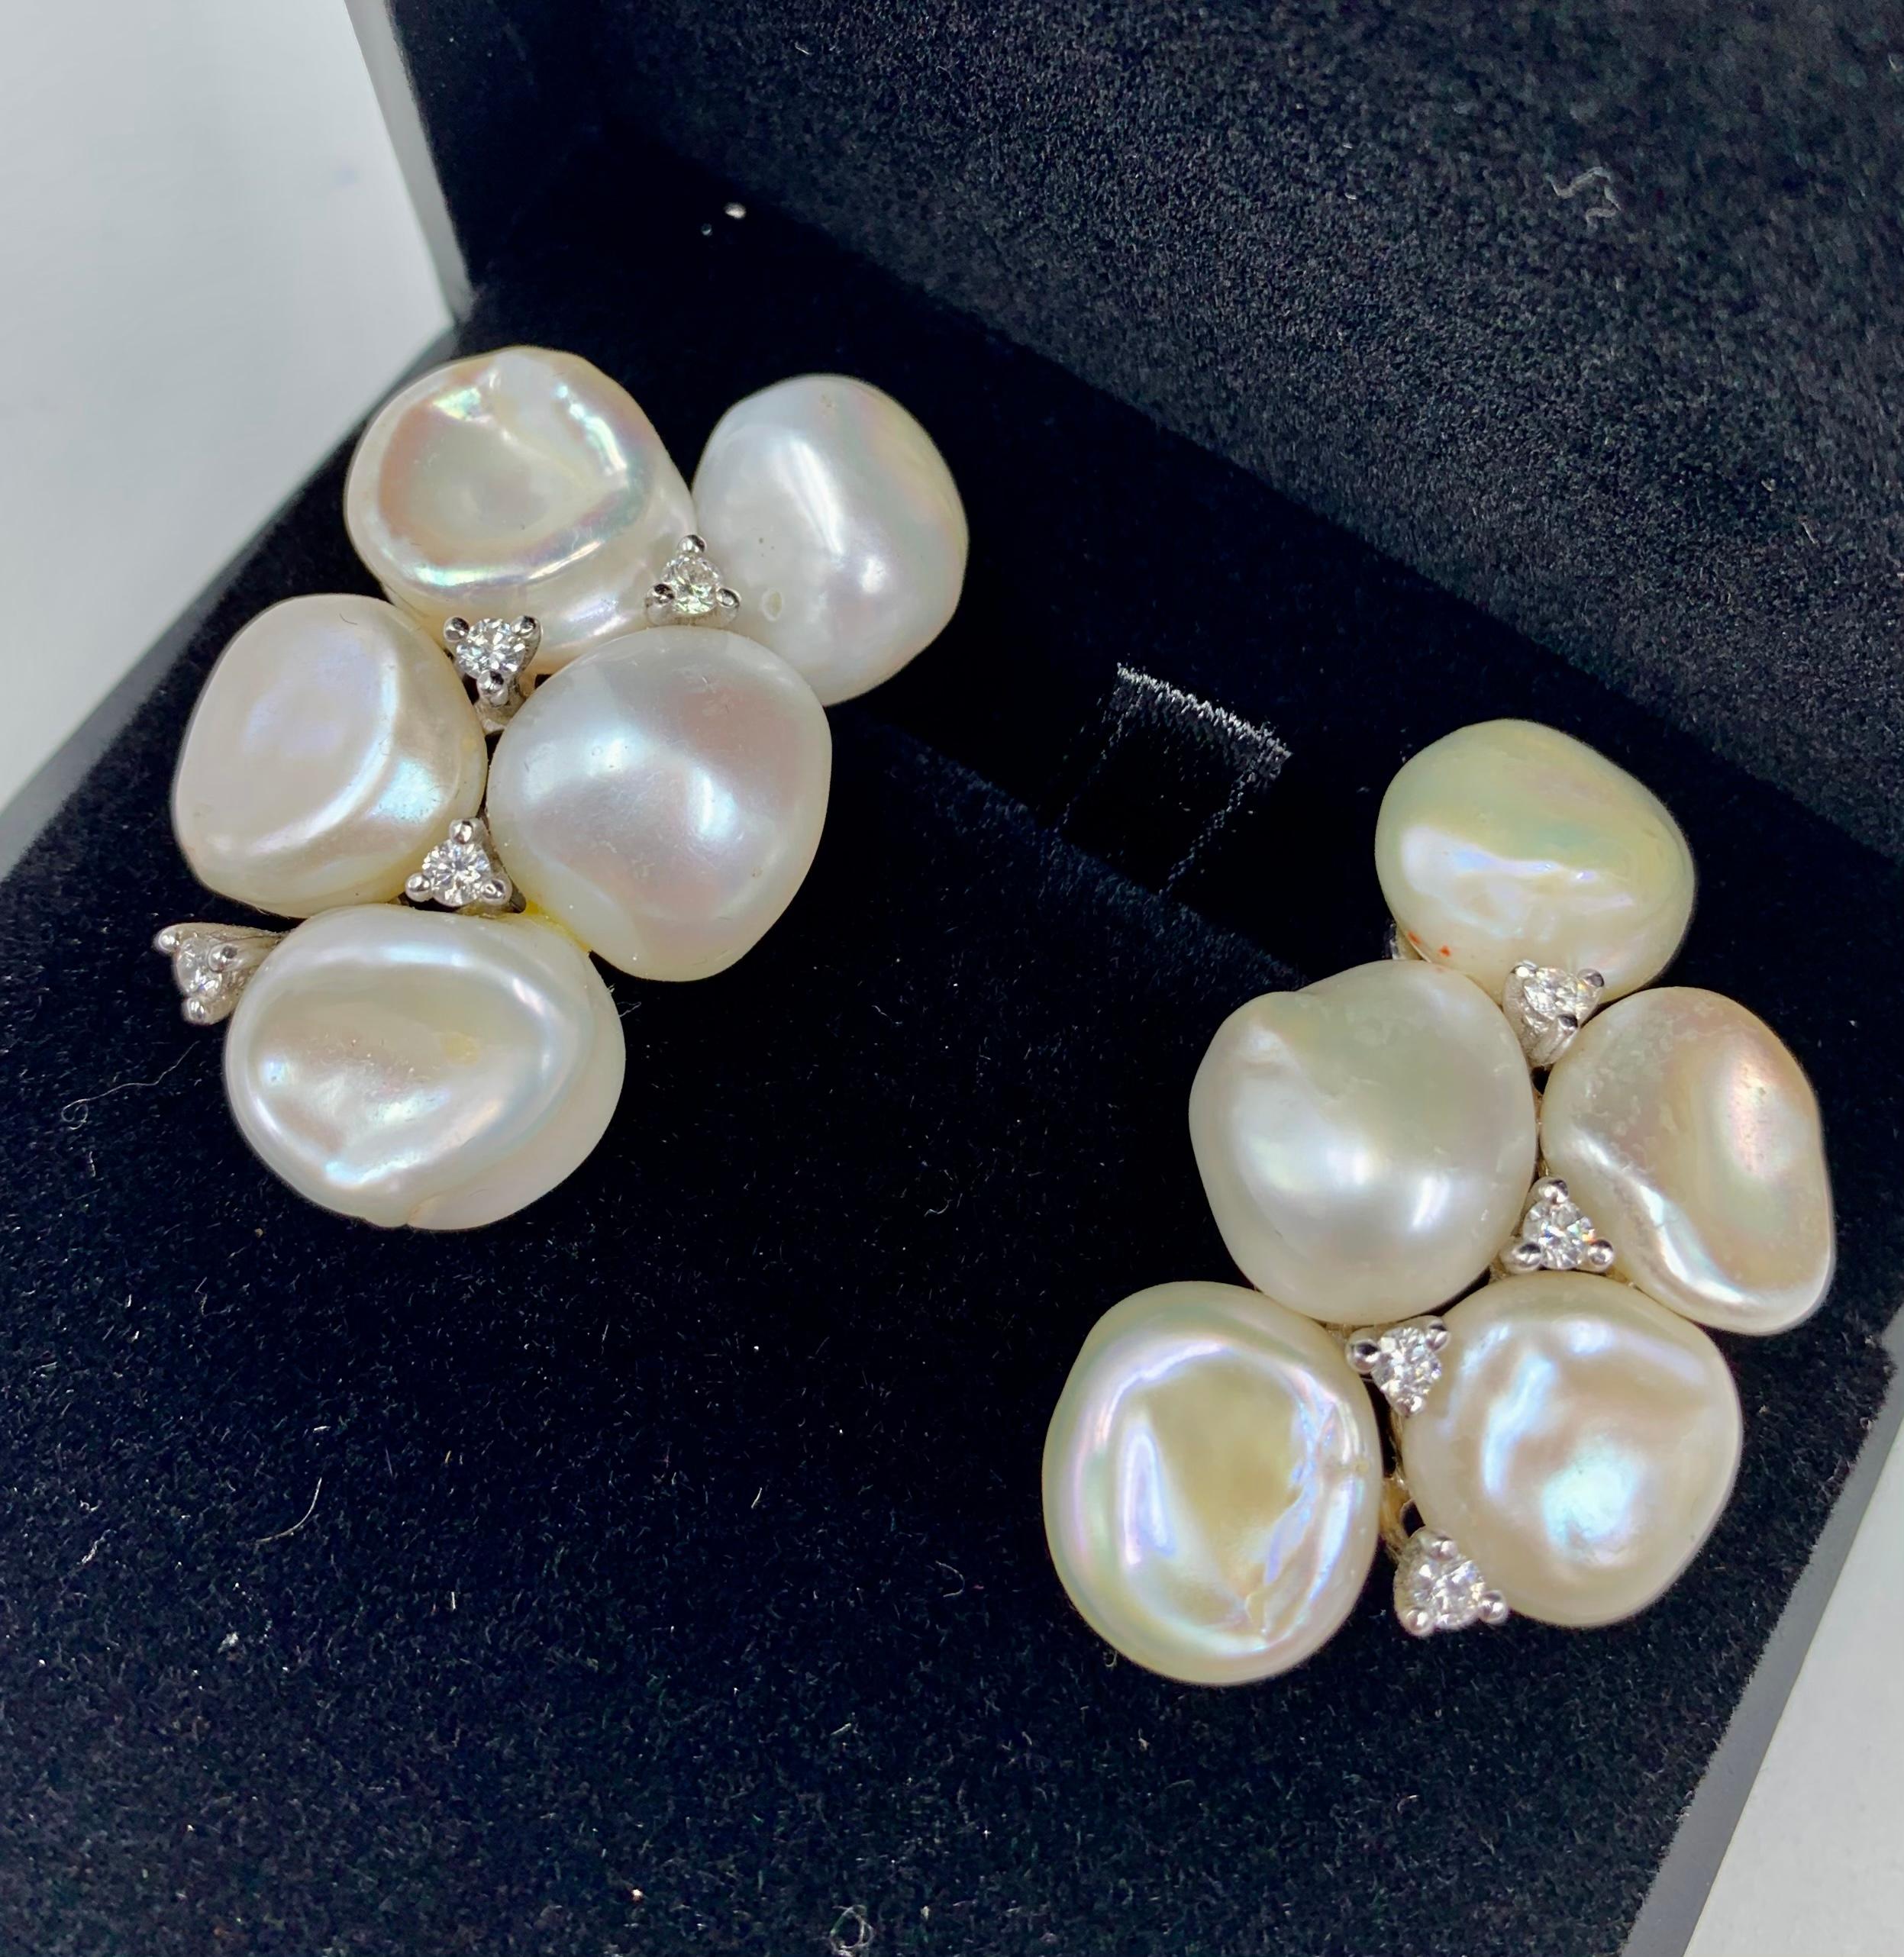 Beautiful lustrous creamy white Keshi pearl and diamond earrings signed Yvel, each composed of five Keshi pearls measuring approximately 12mm each with diamond accents set in great quality 18K white gold setting.
Excellent condition
Pearls with very